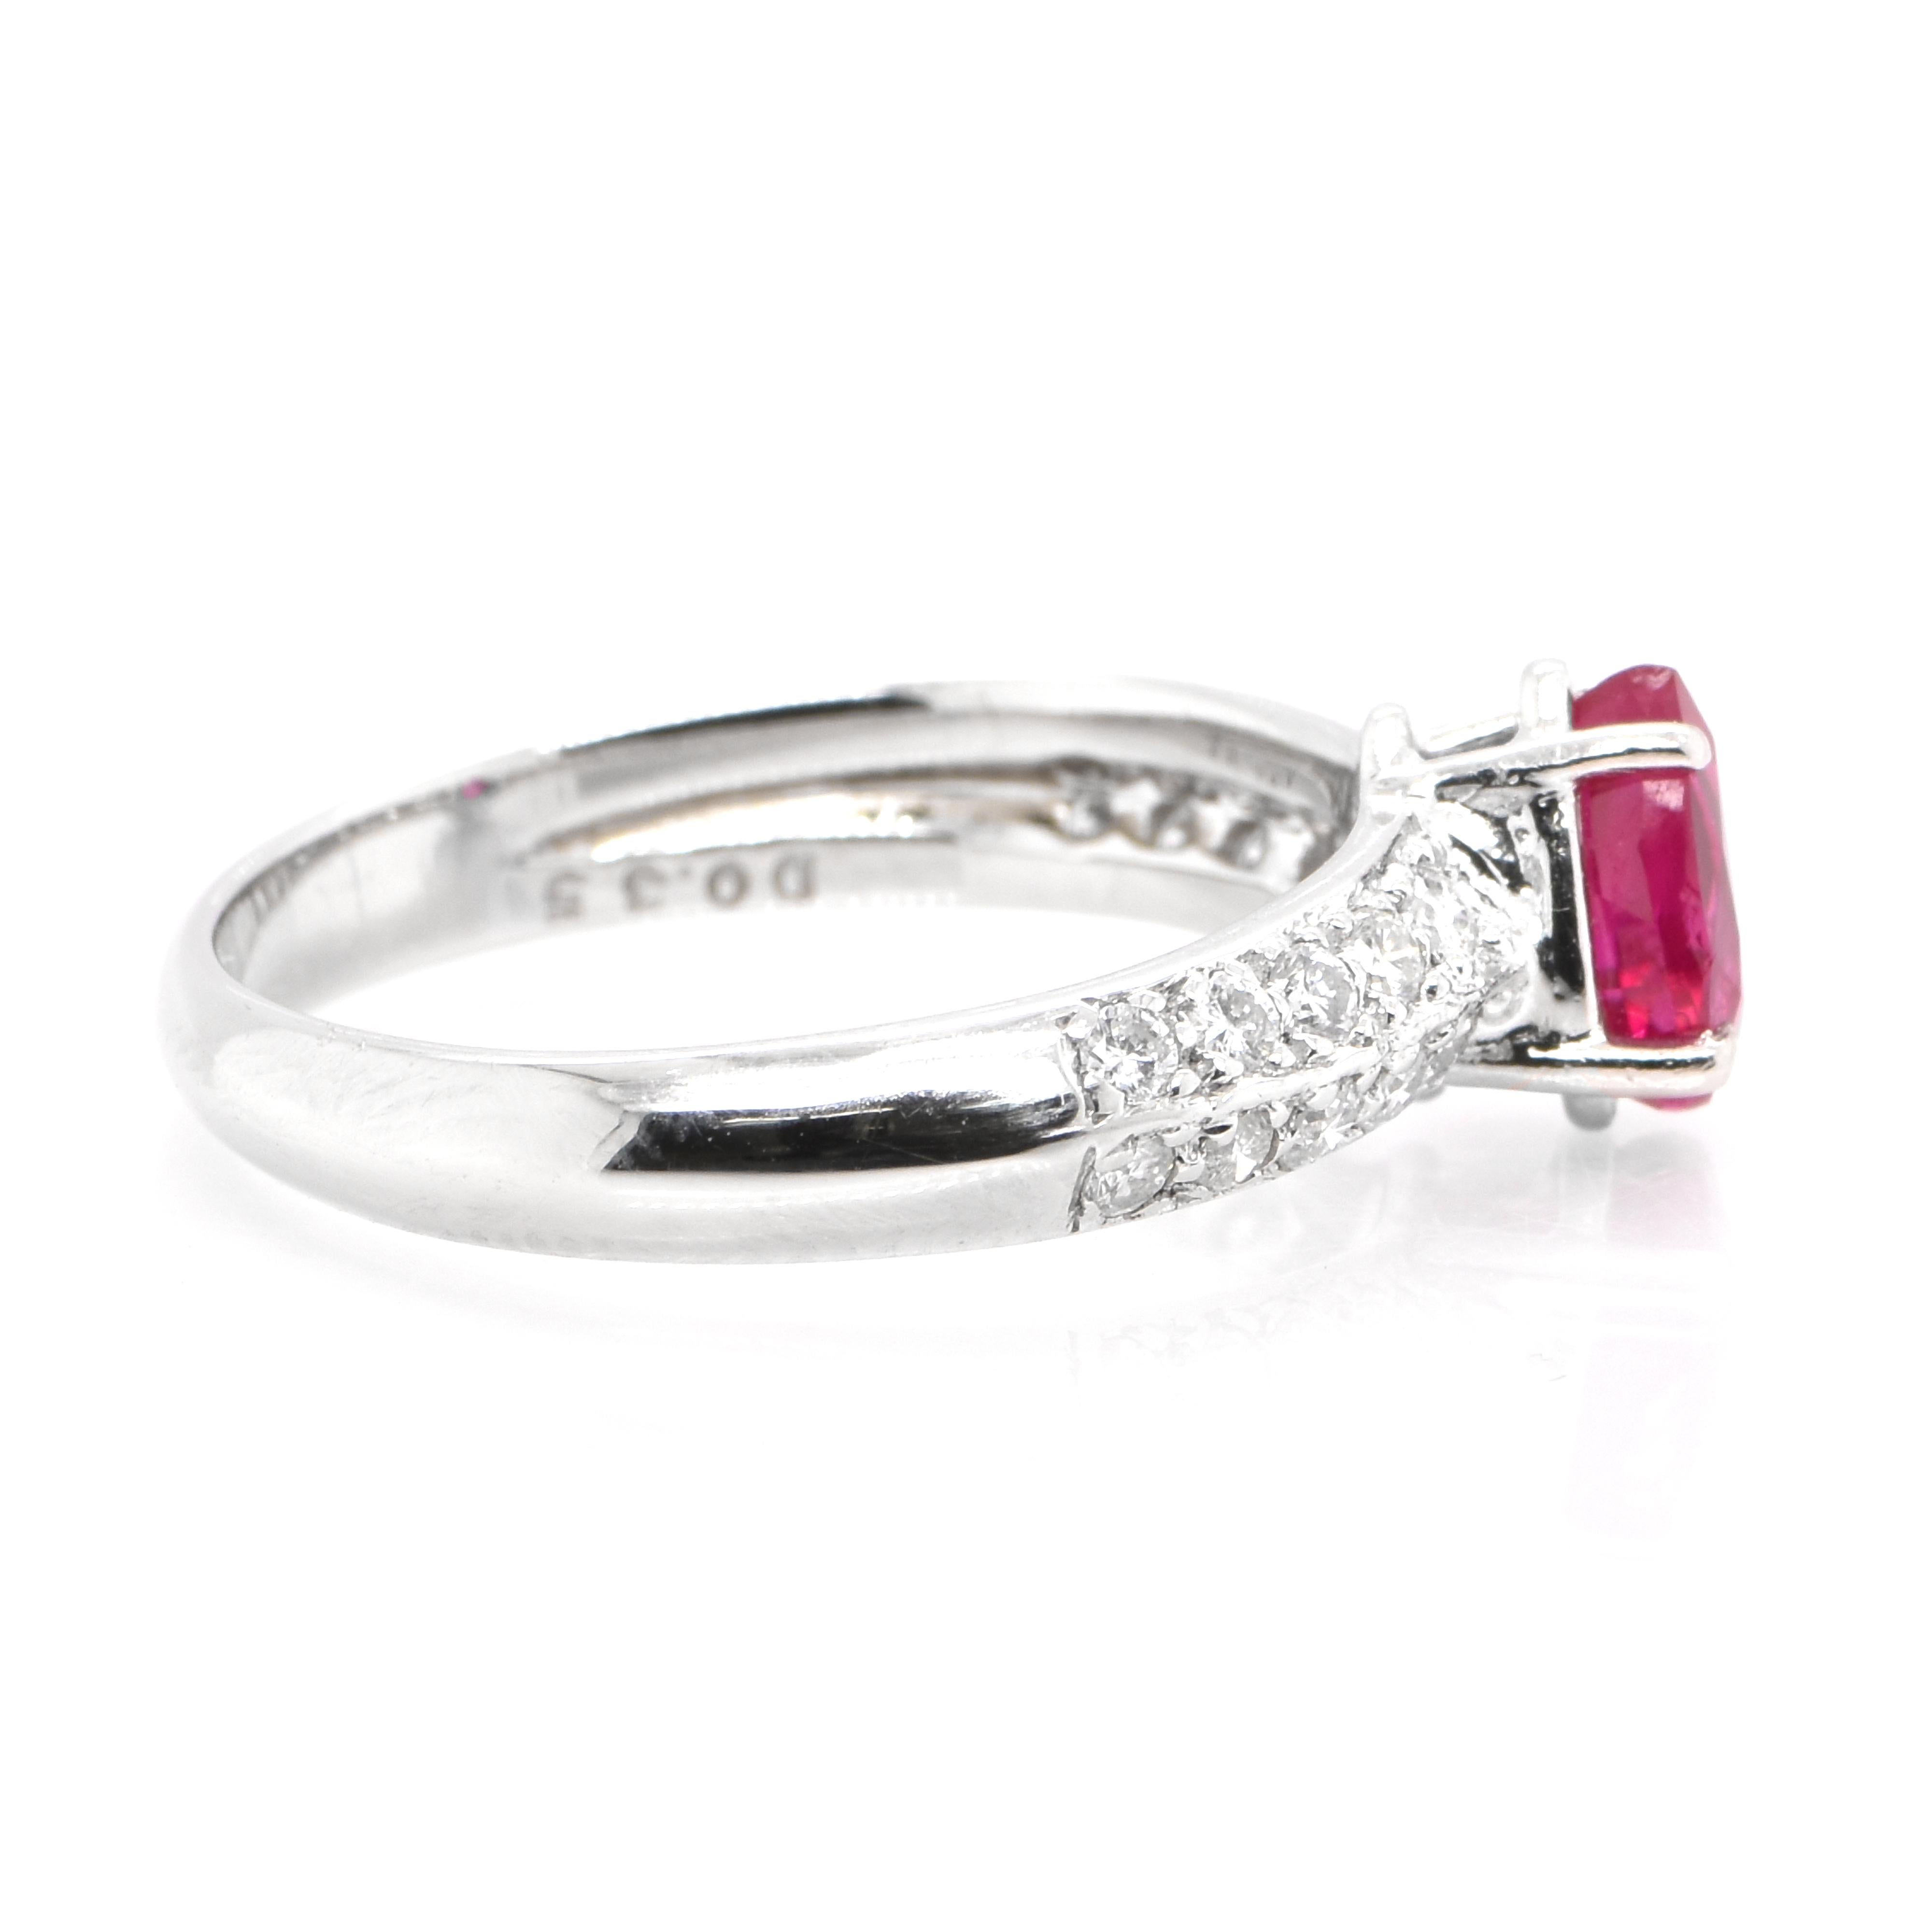 Women's 1.00 Carat Natural Pear Cut Ruby and Diamond Ring Set in Platinum For Sale